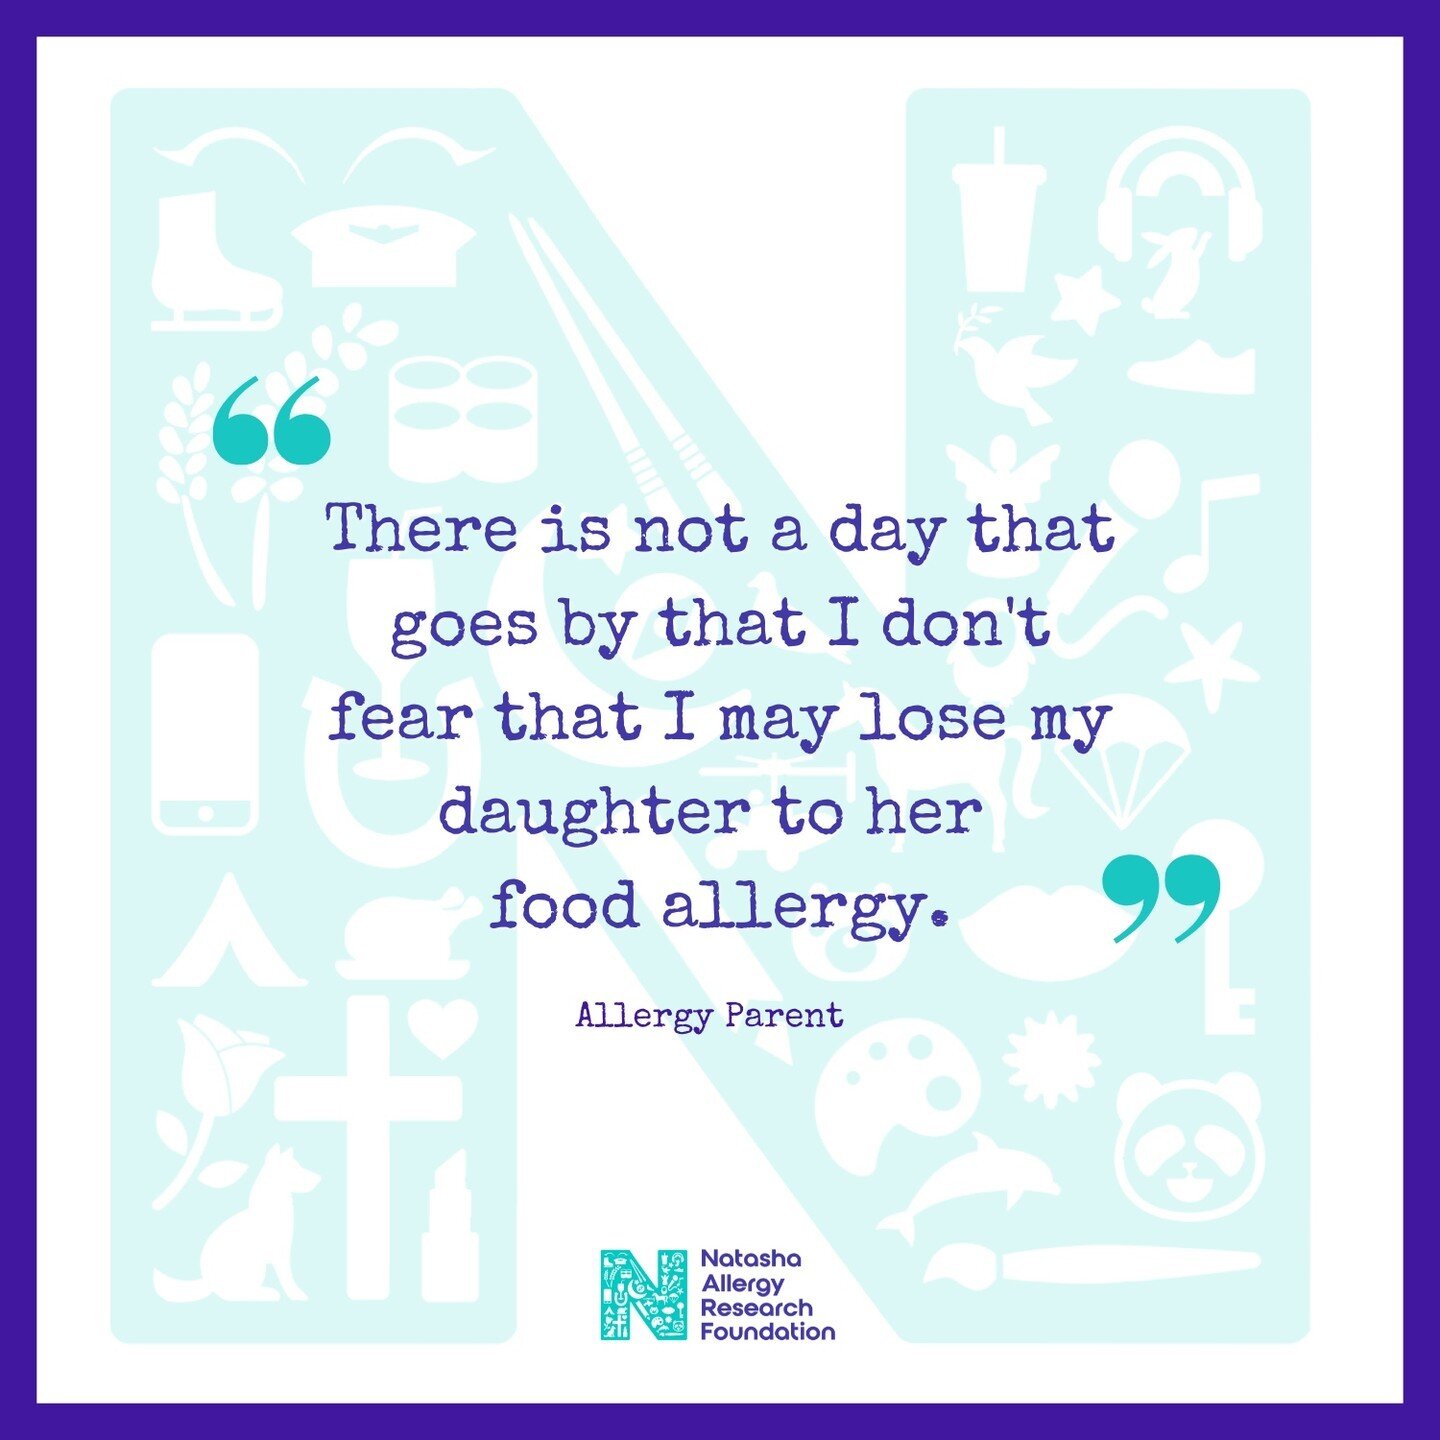 A mum recently contacted us, and told us, &ldquo;There is not a day that goes by that I don't fear that I may lose my daughter to her food allergy.&ldquo;

She is not alone.

In 2019, an Asthma and Allergy Foundation of America study found in a surve